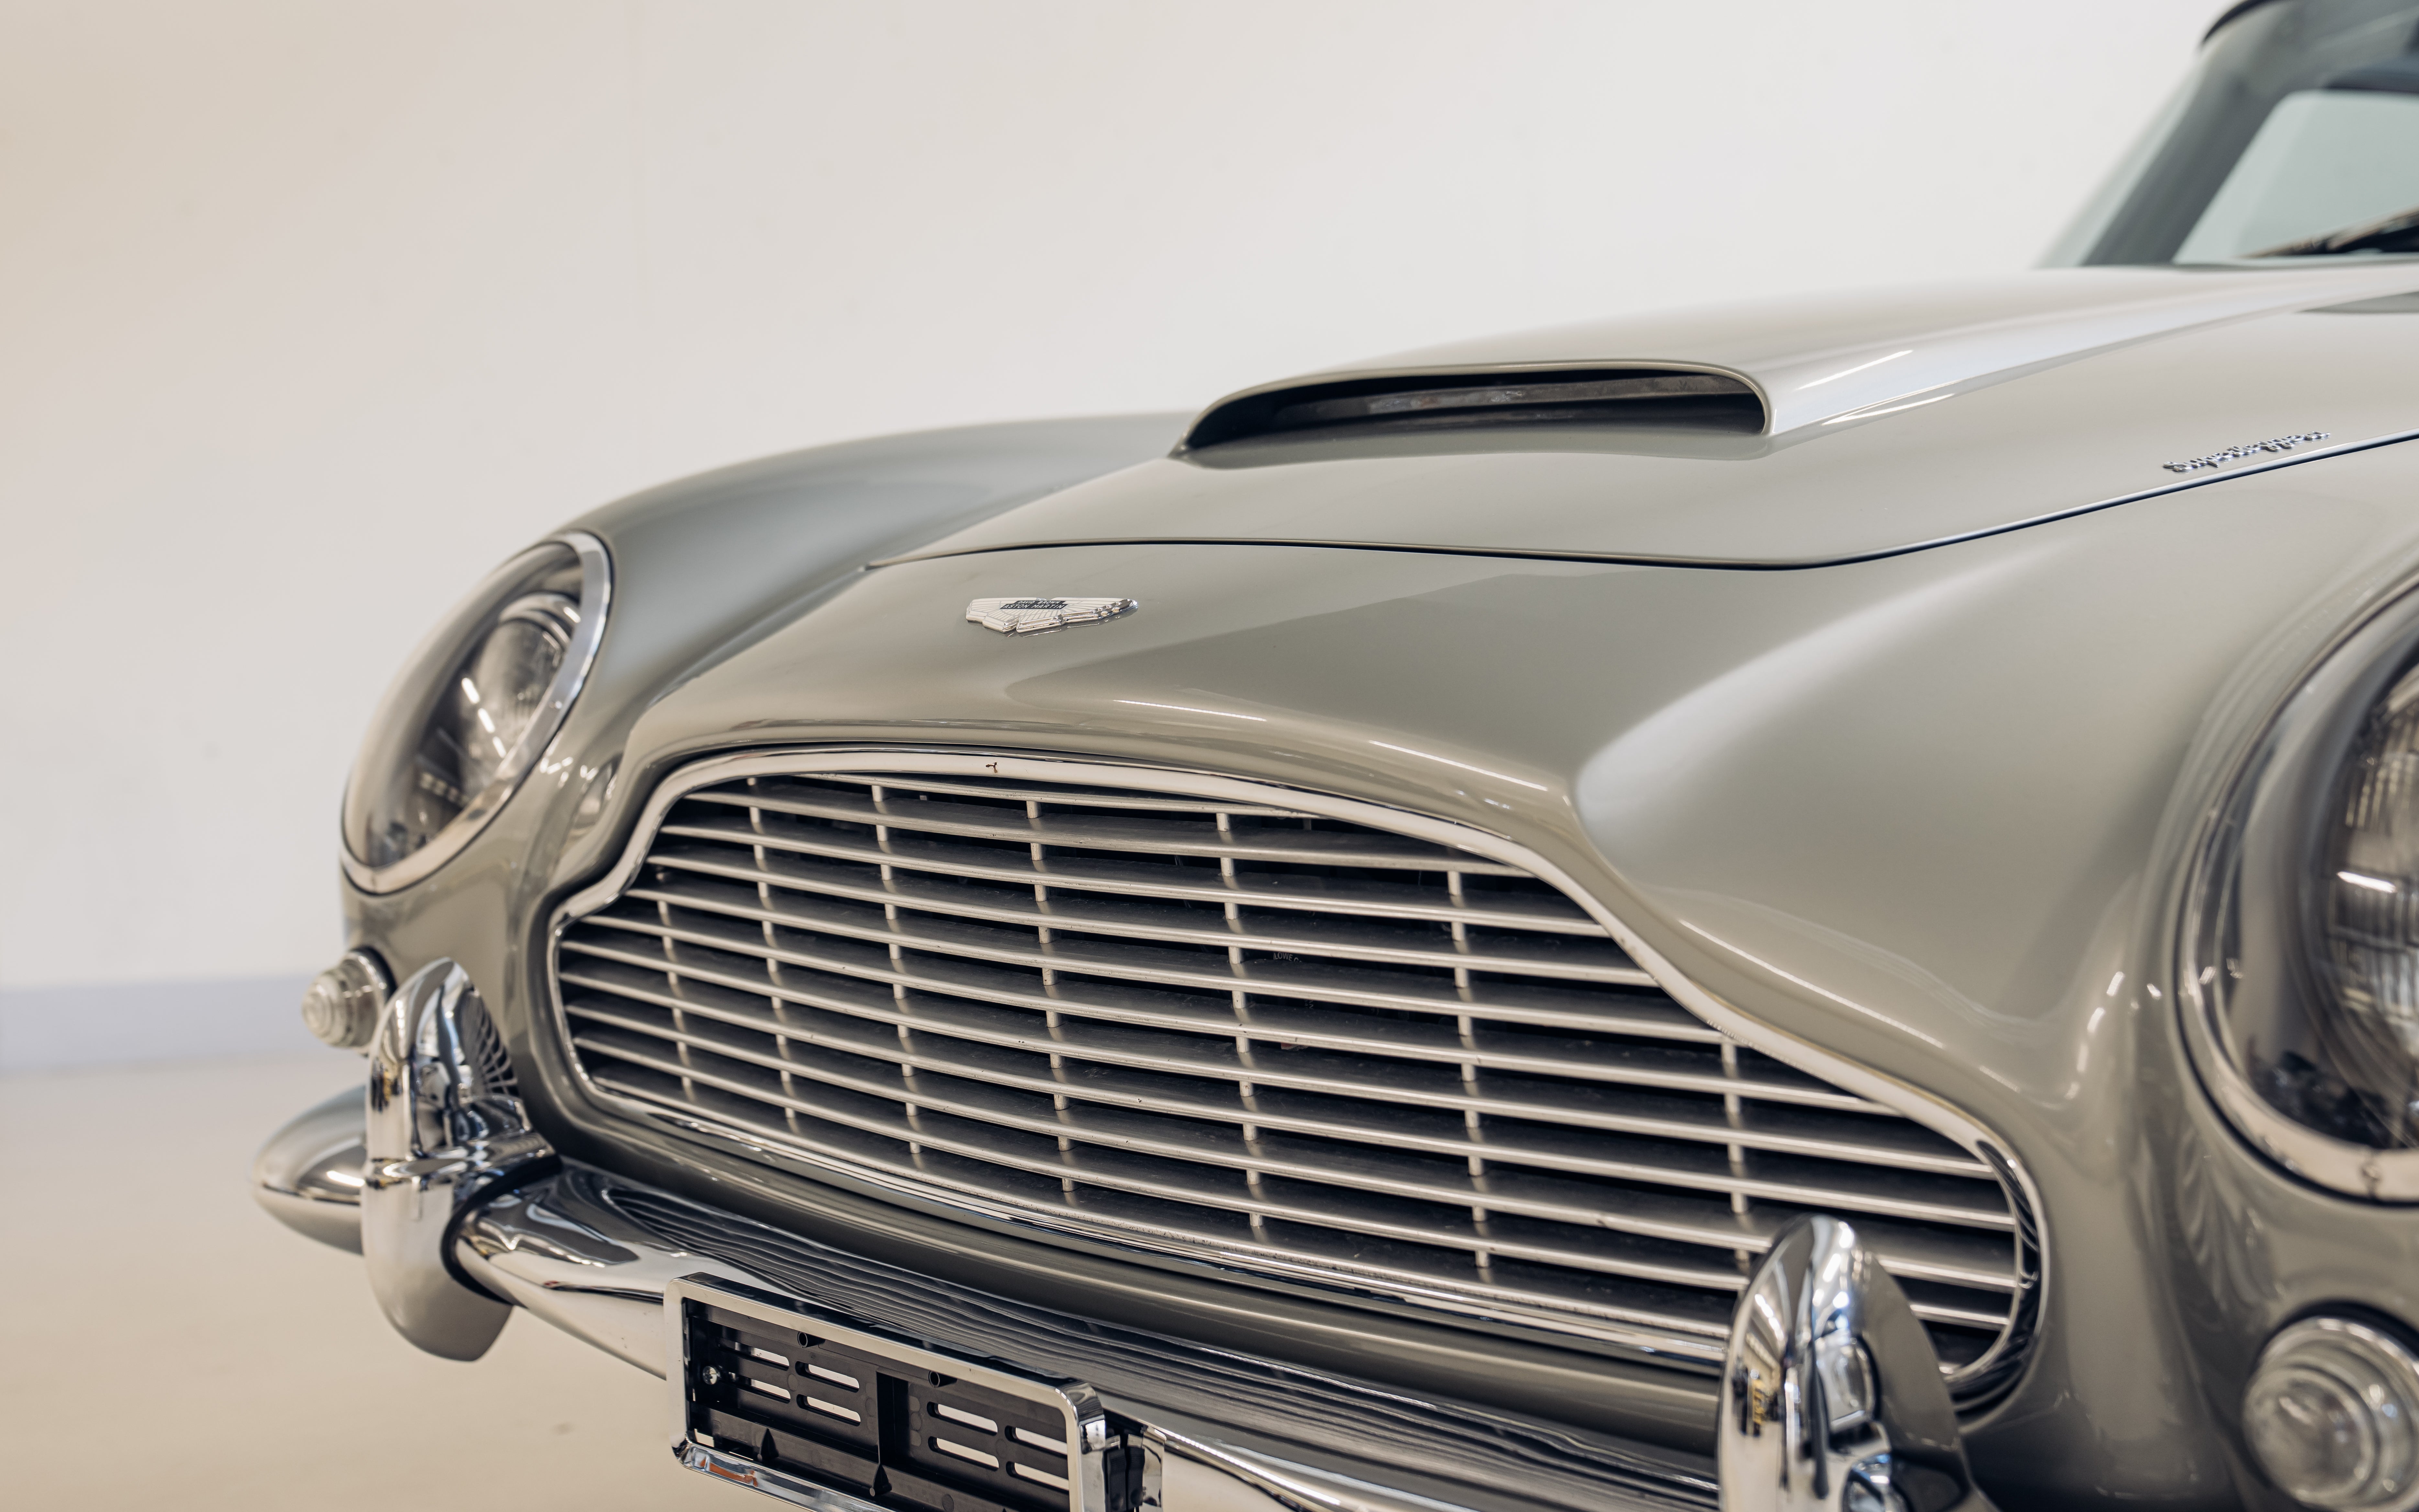 Sean Connery's 'James Bond' Aston Martin DB5 is up for auction